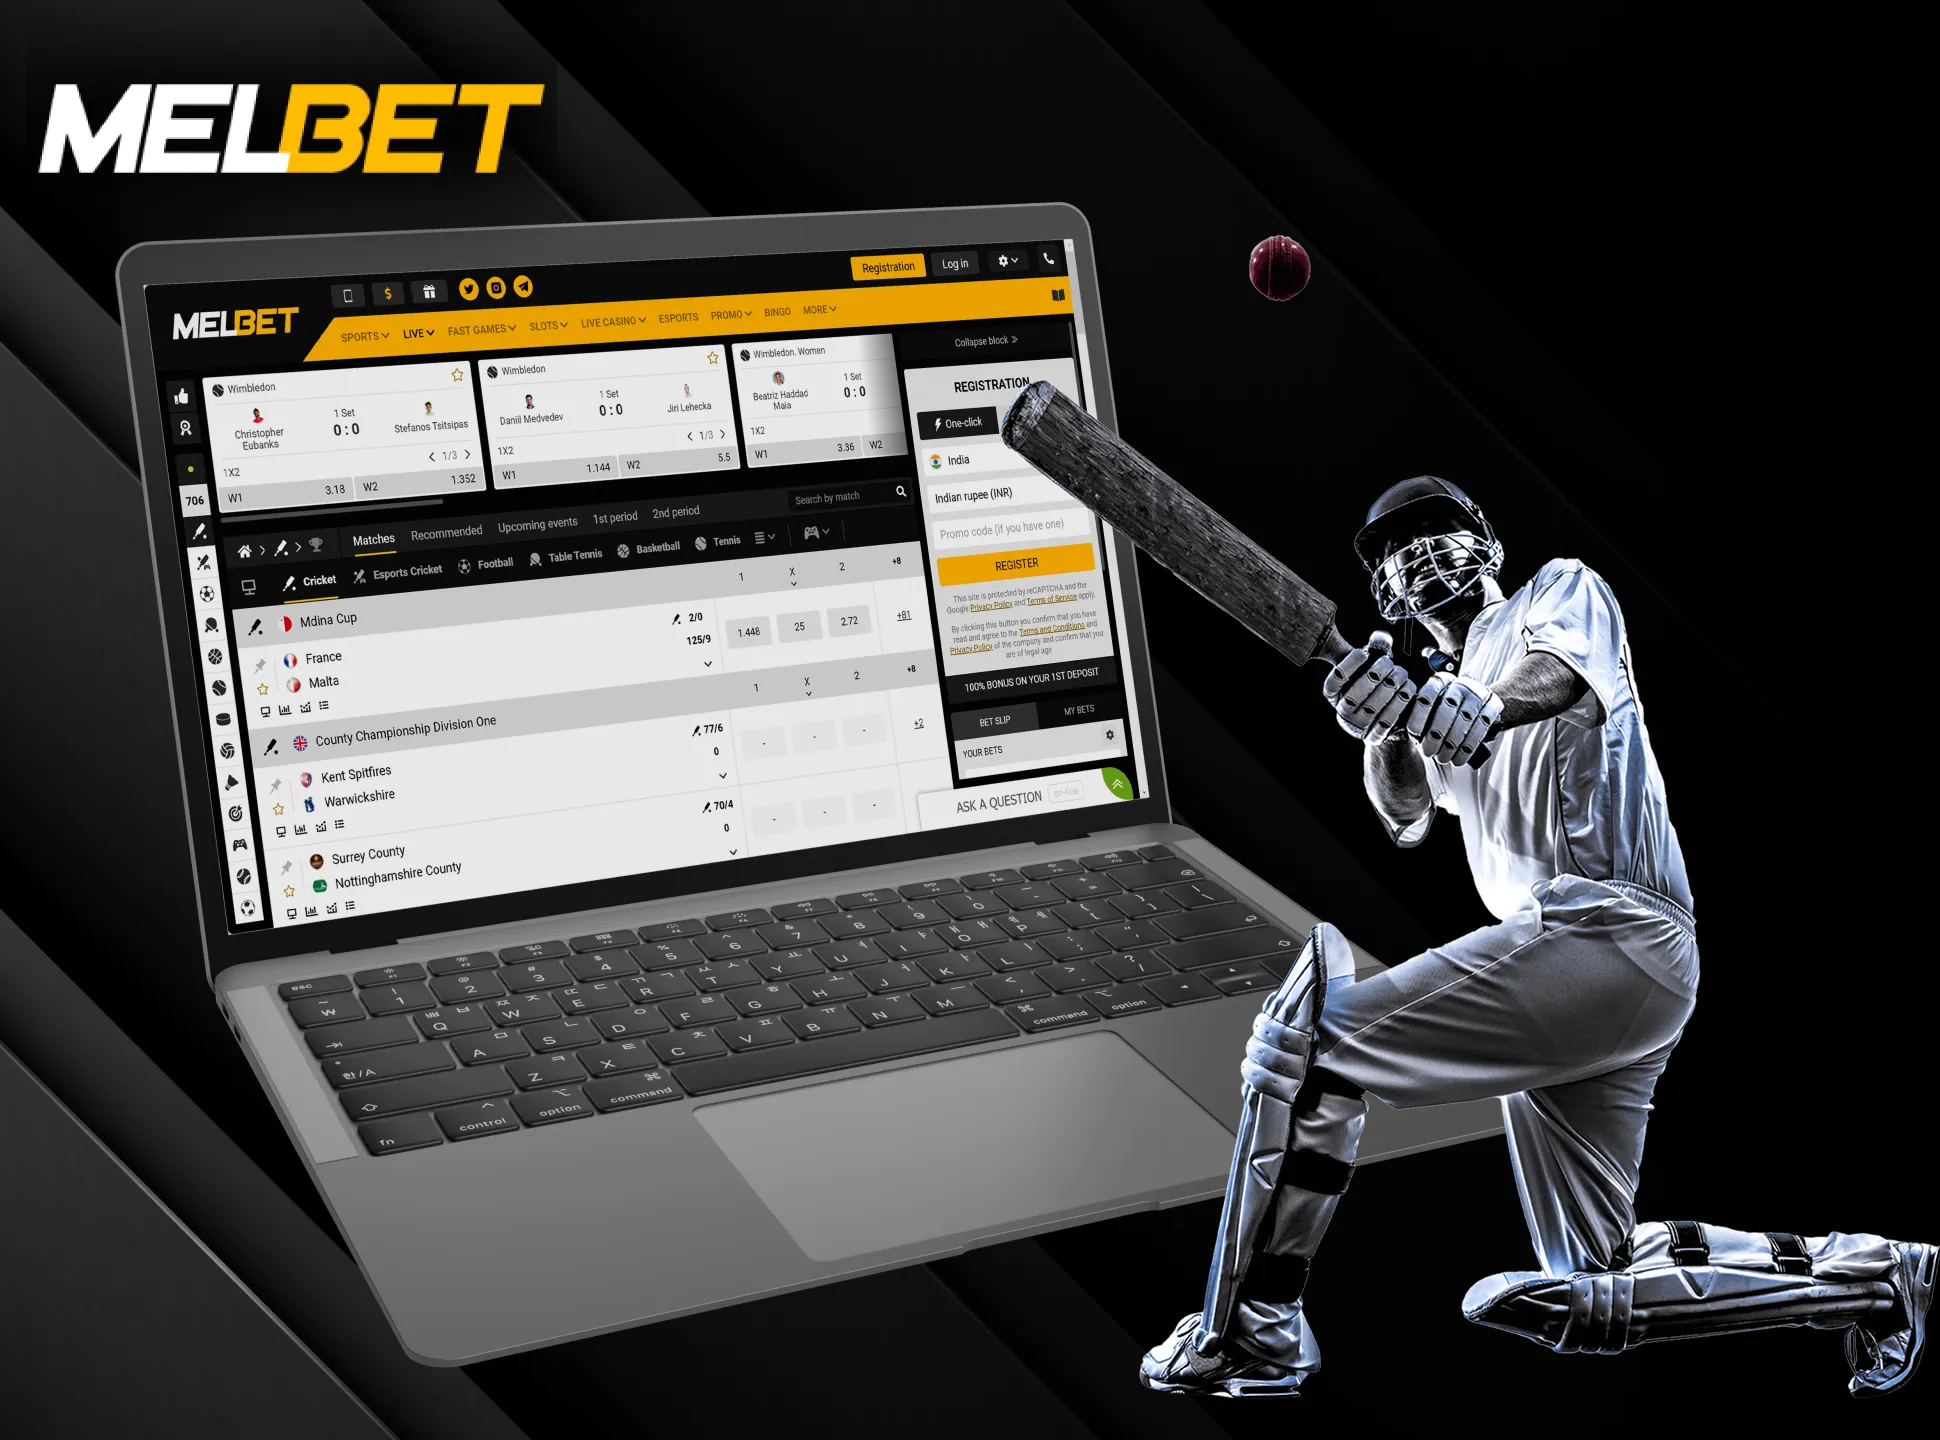 Choose Melbet for cricket betting.